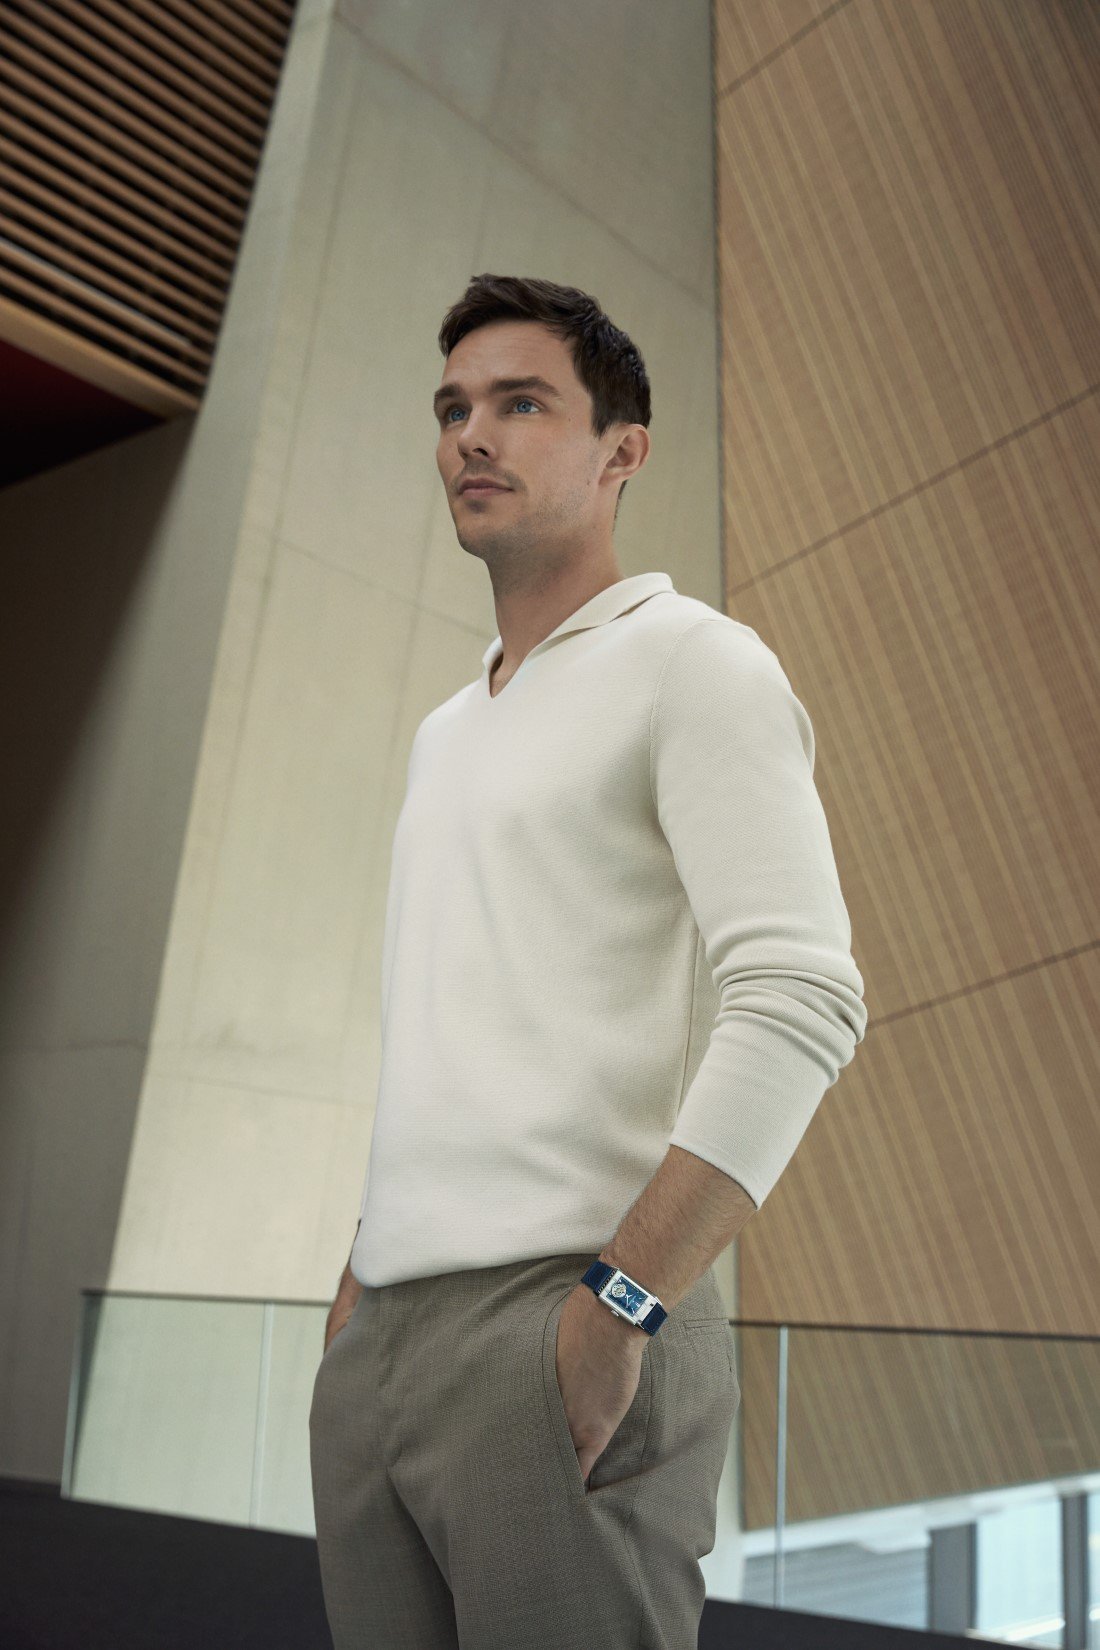 Jaeger-LeCoultre x Nicholas Hoult - The Turning Point